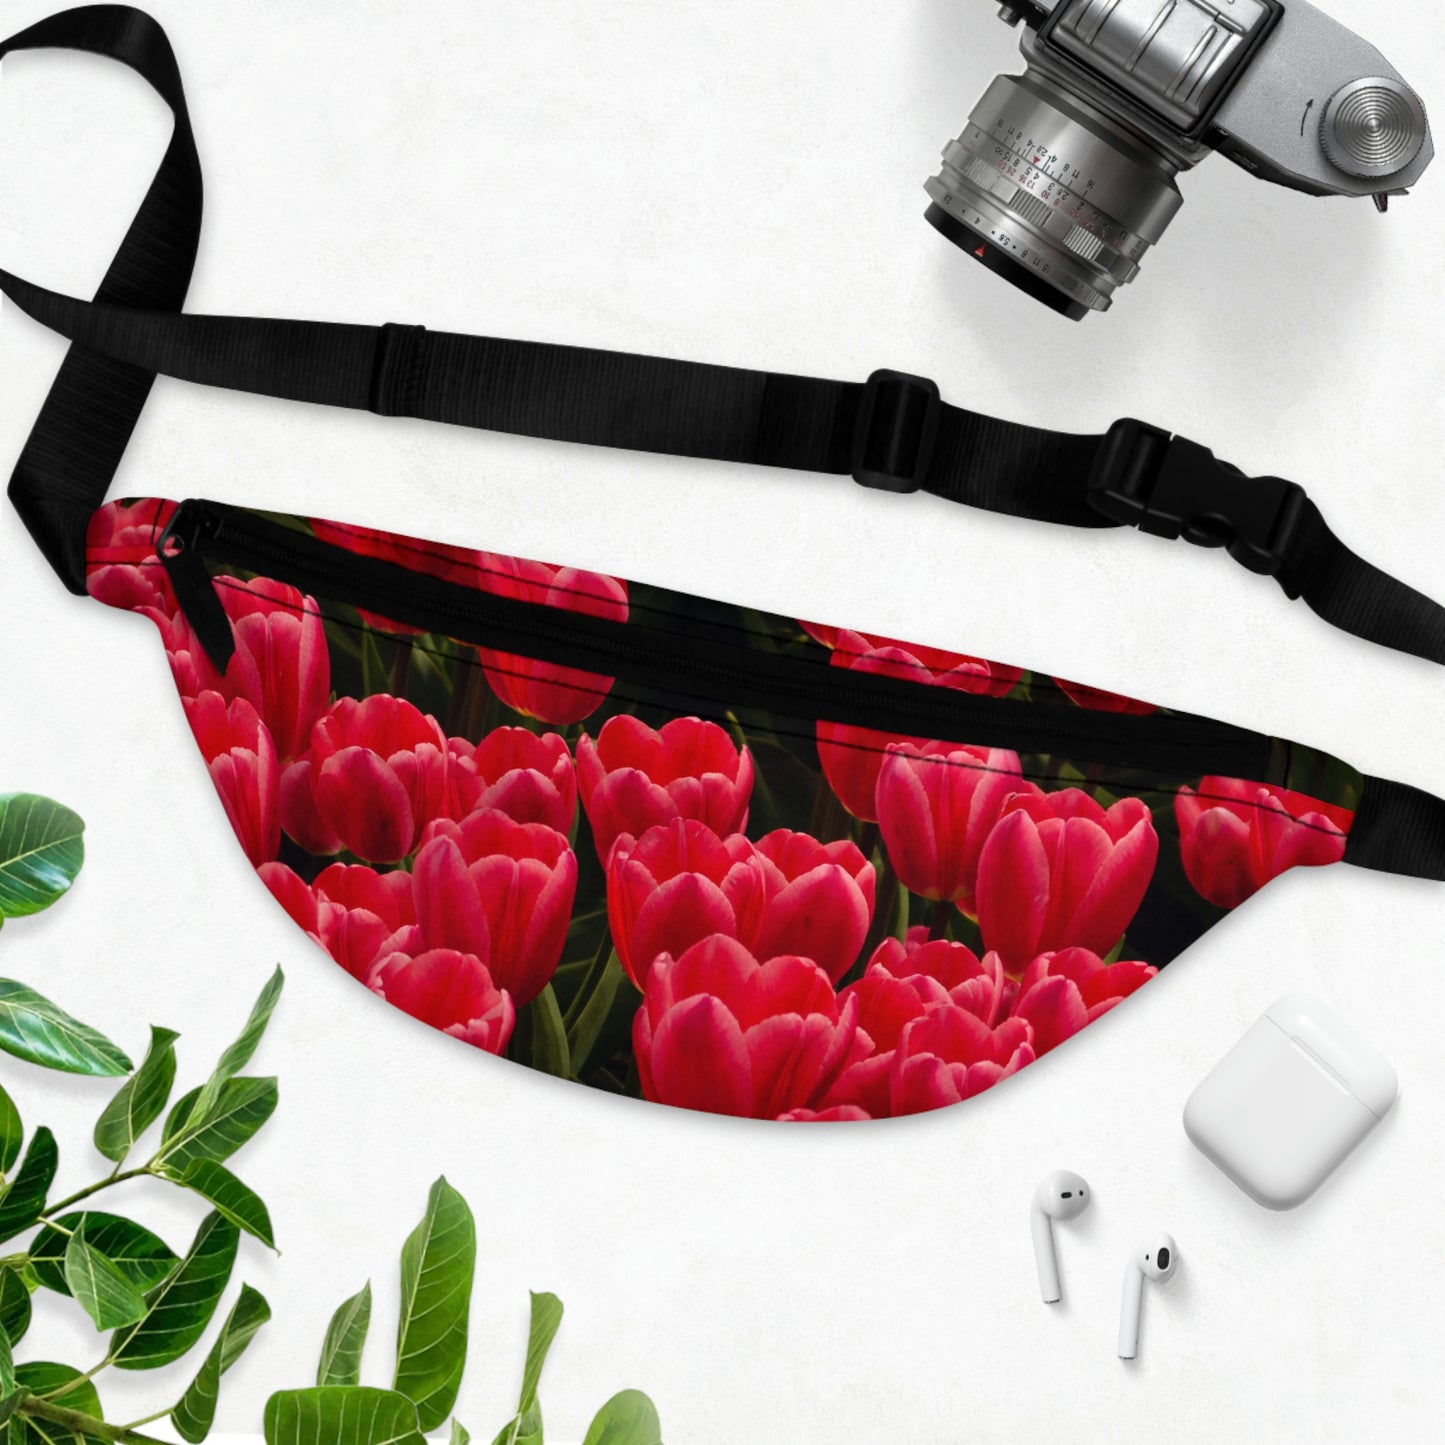 Flowers 24 Fanny Pack